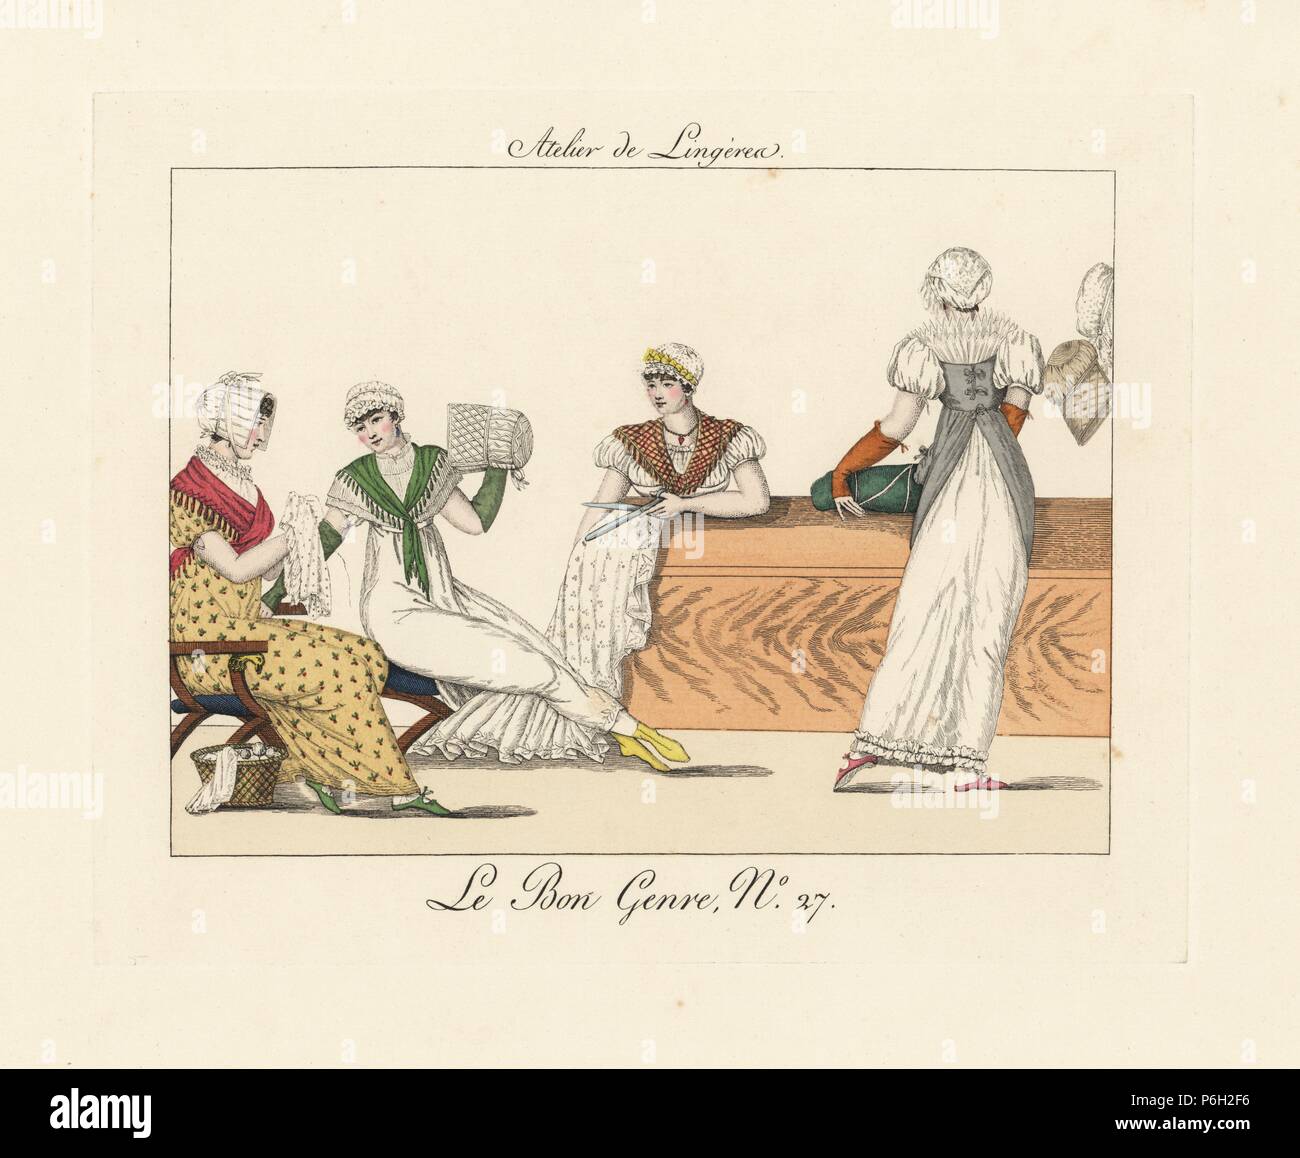 Fabric shop workers. Women in muslin dresses, bonnets and shawls embroidering, sewing, cutting cloth and wrapping bolts of fabric. 'If ever coquetry were lost by women, one would find it again at the ladies counter.' Handcoloured engraving from Pierre de la Mesangere's Le Bon Genre, Paris, 1817. Stock Photo